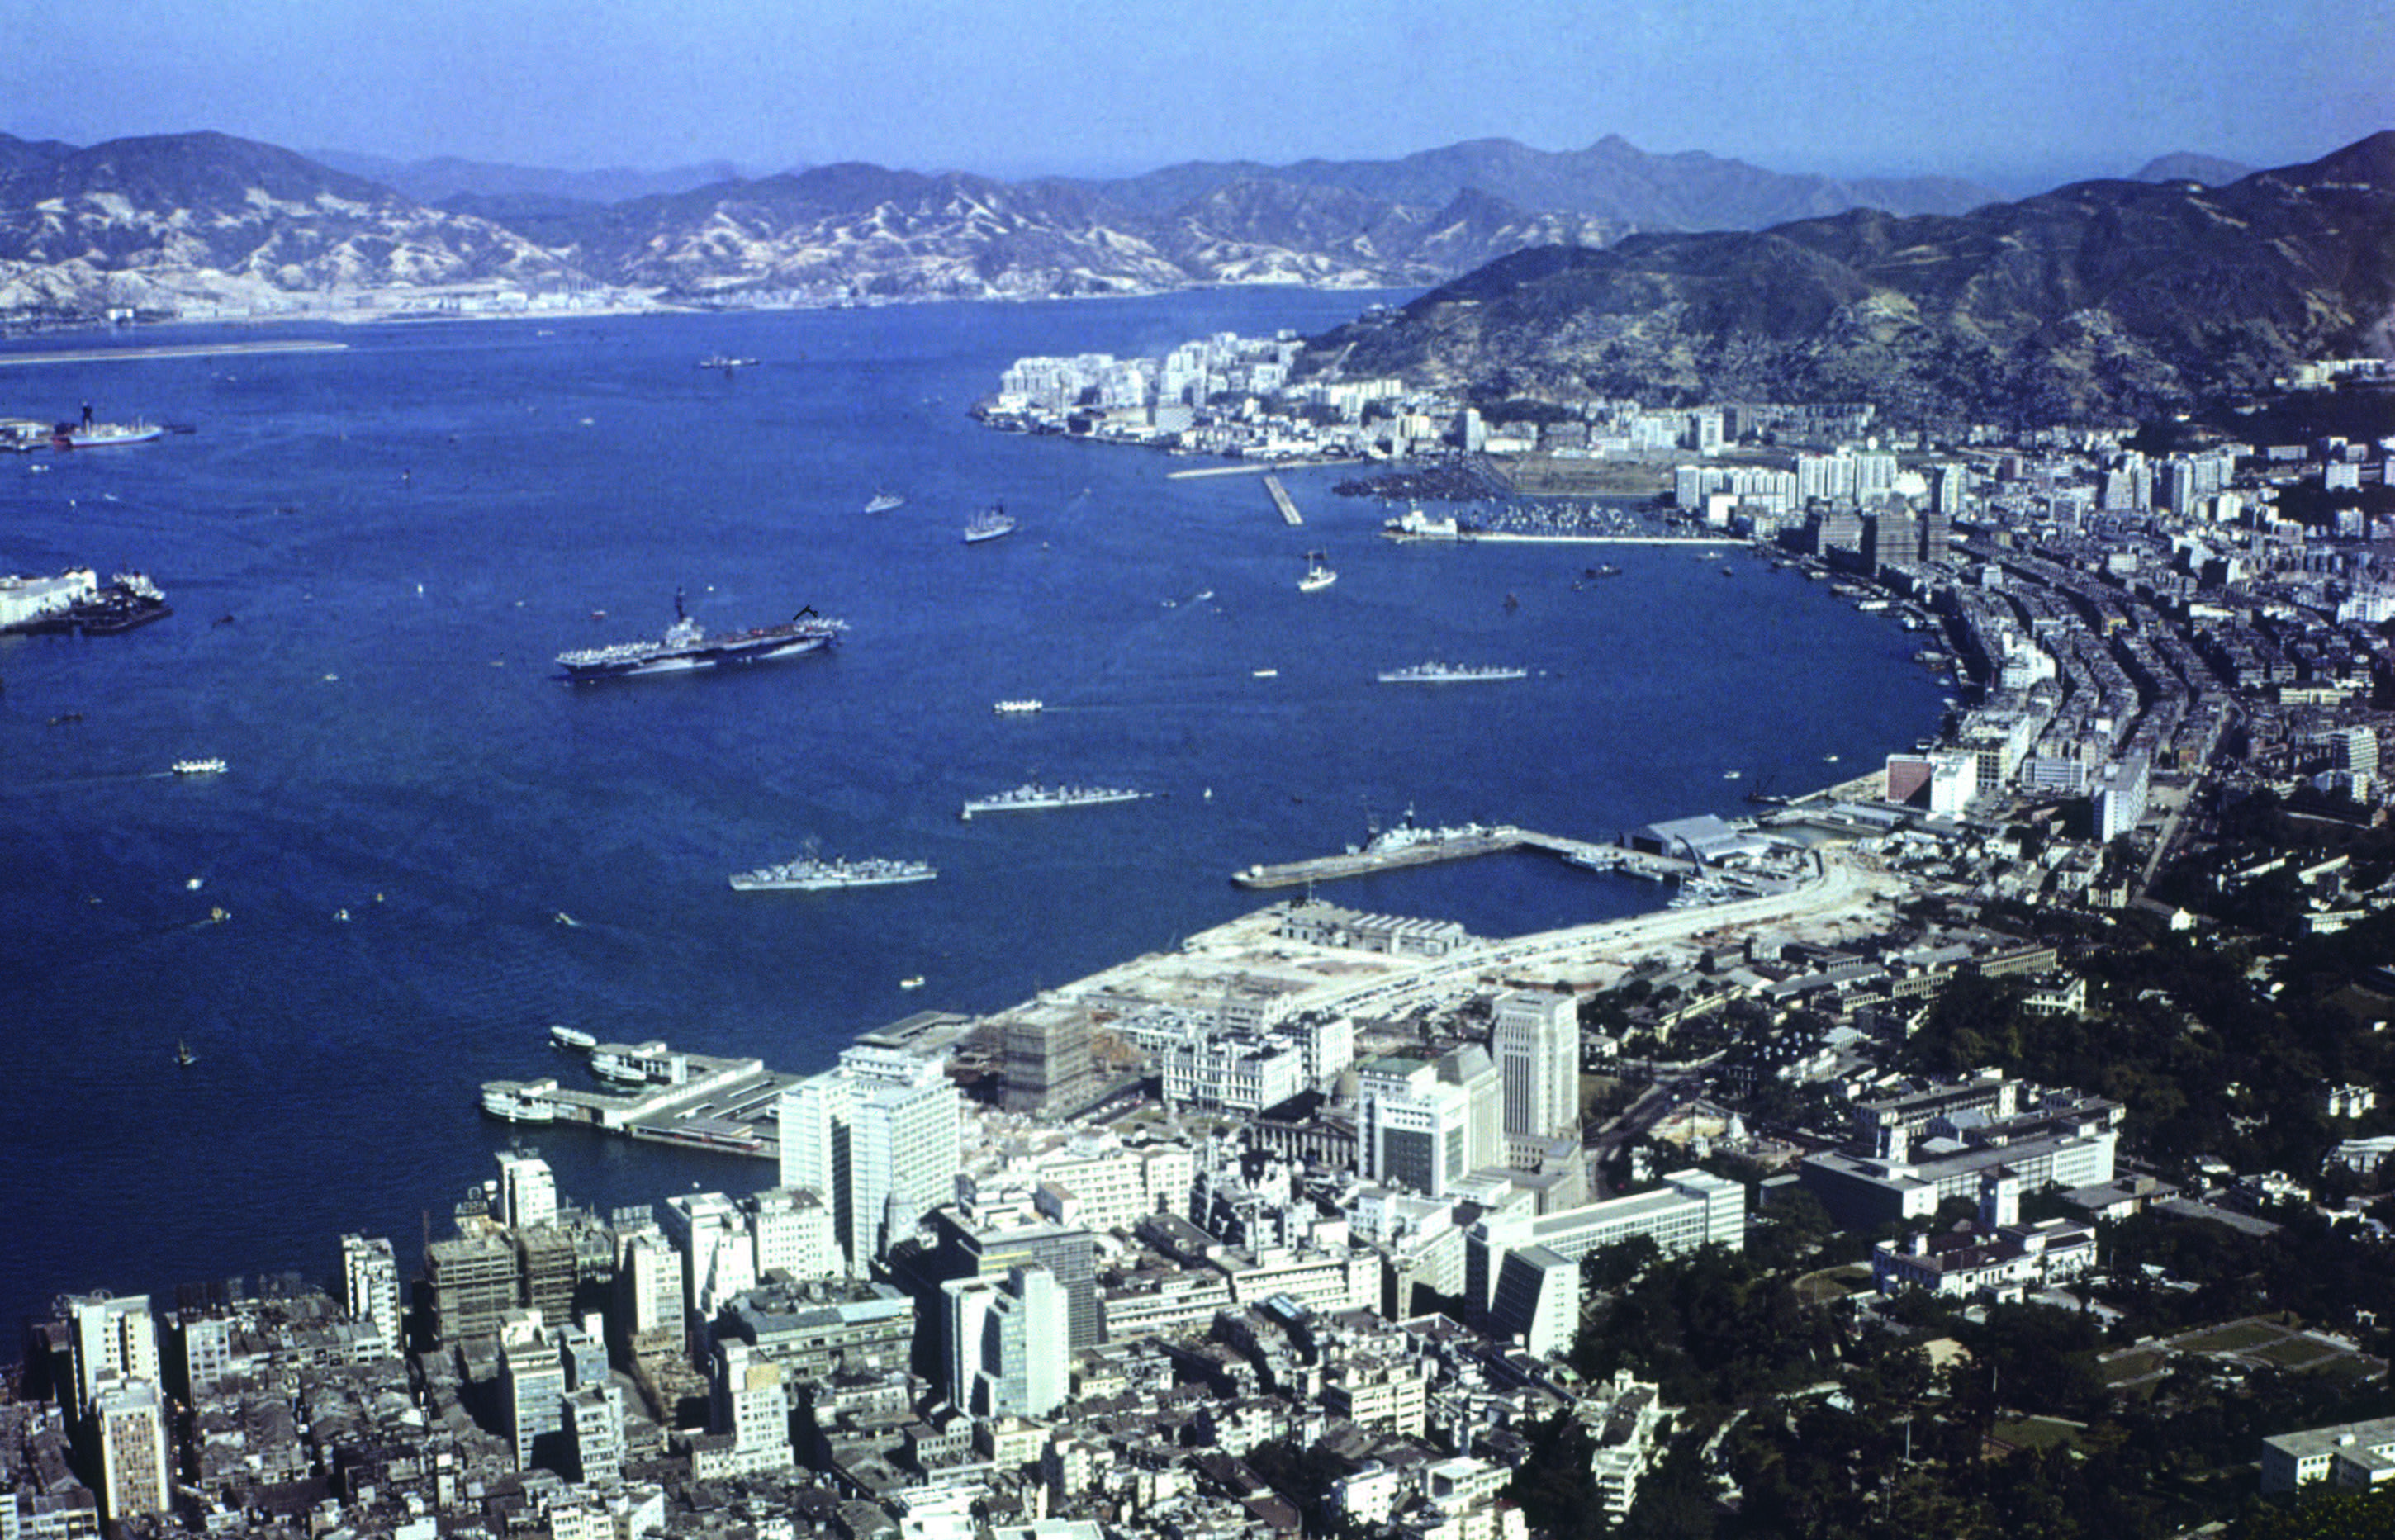 Victoria Harbour in the 1960s